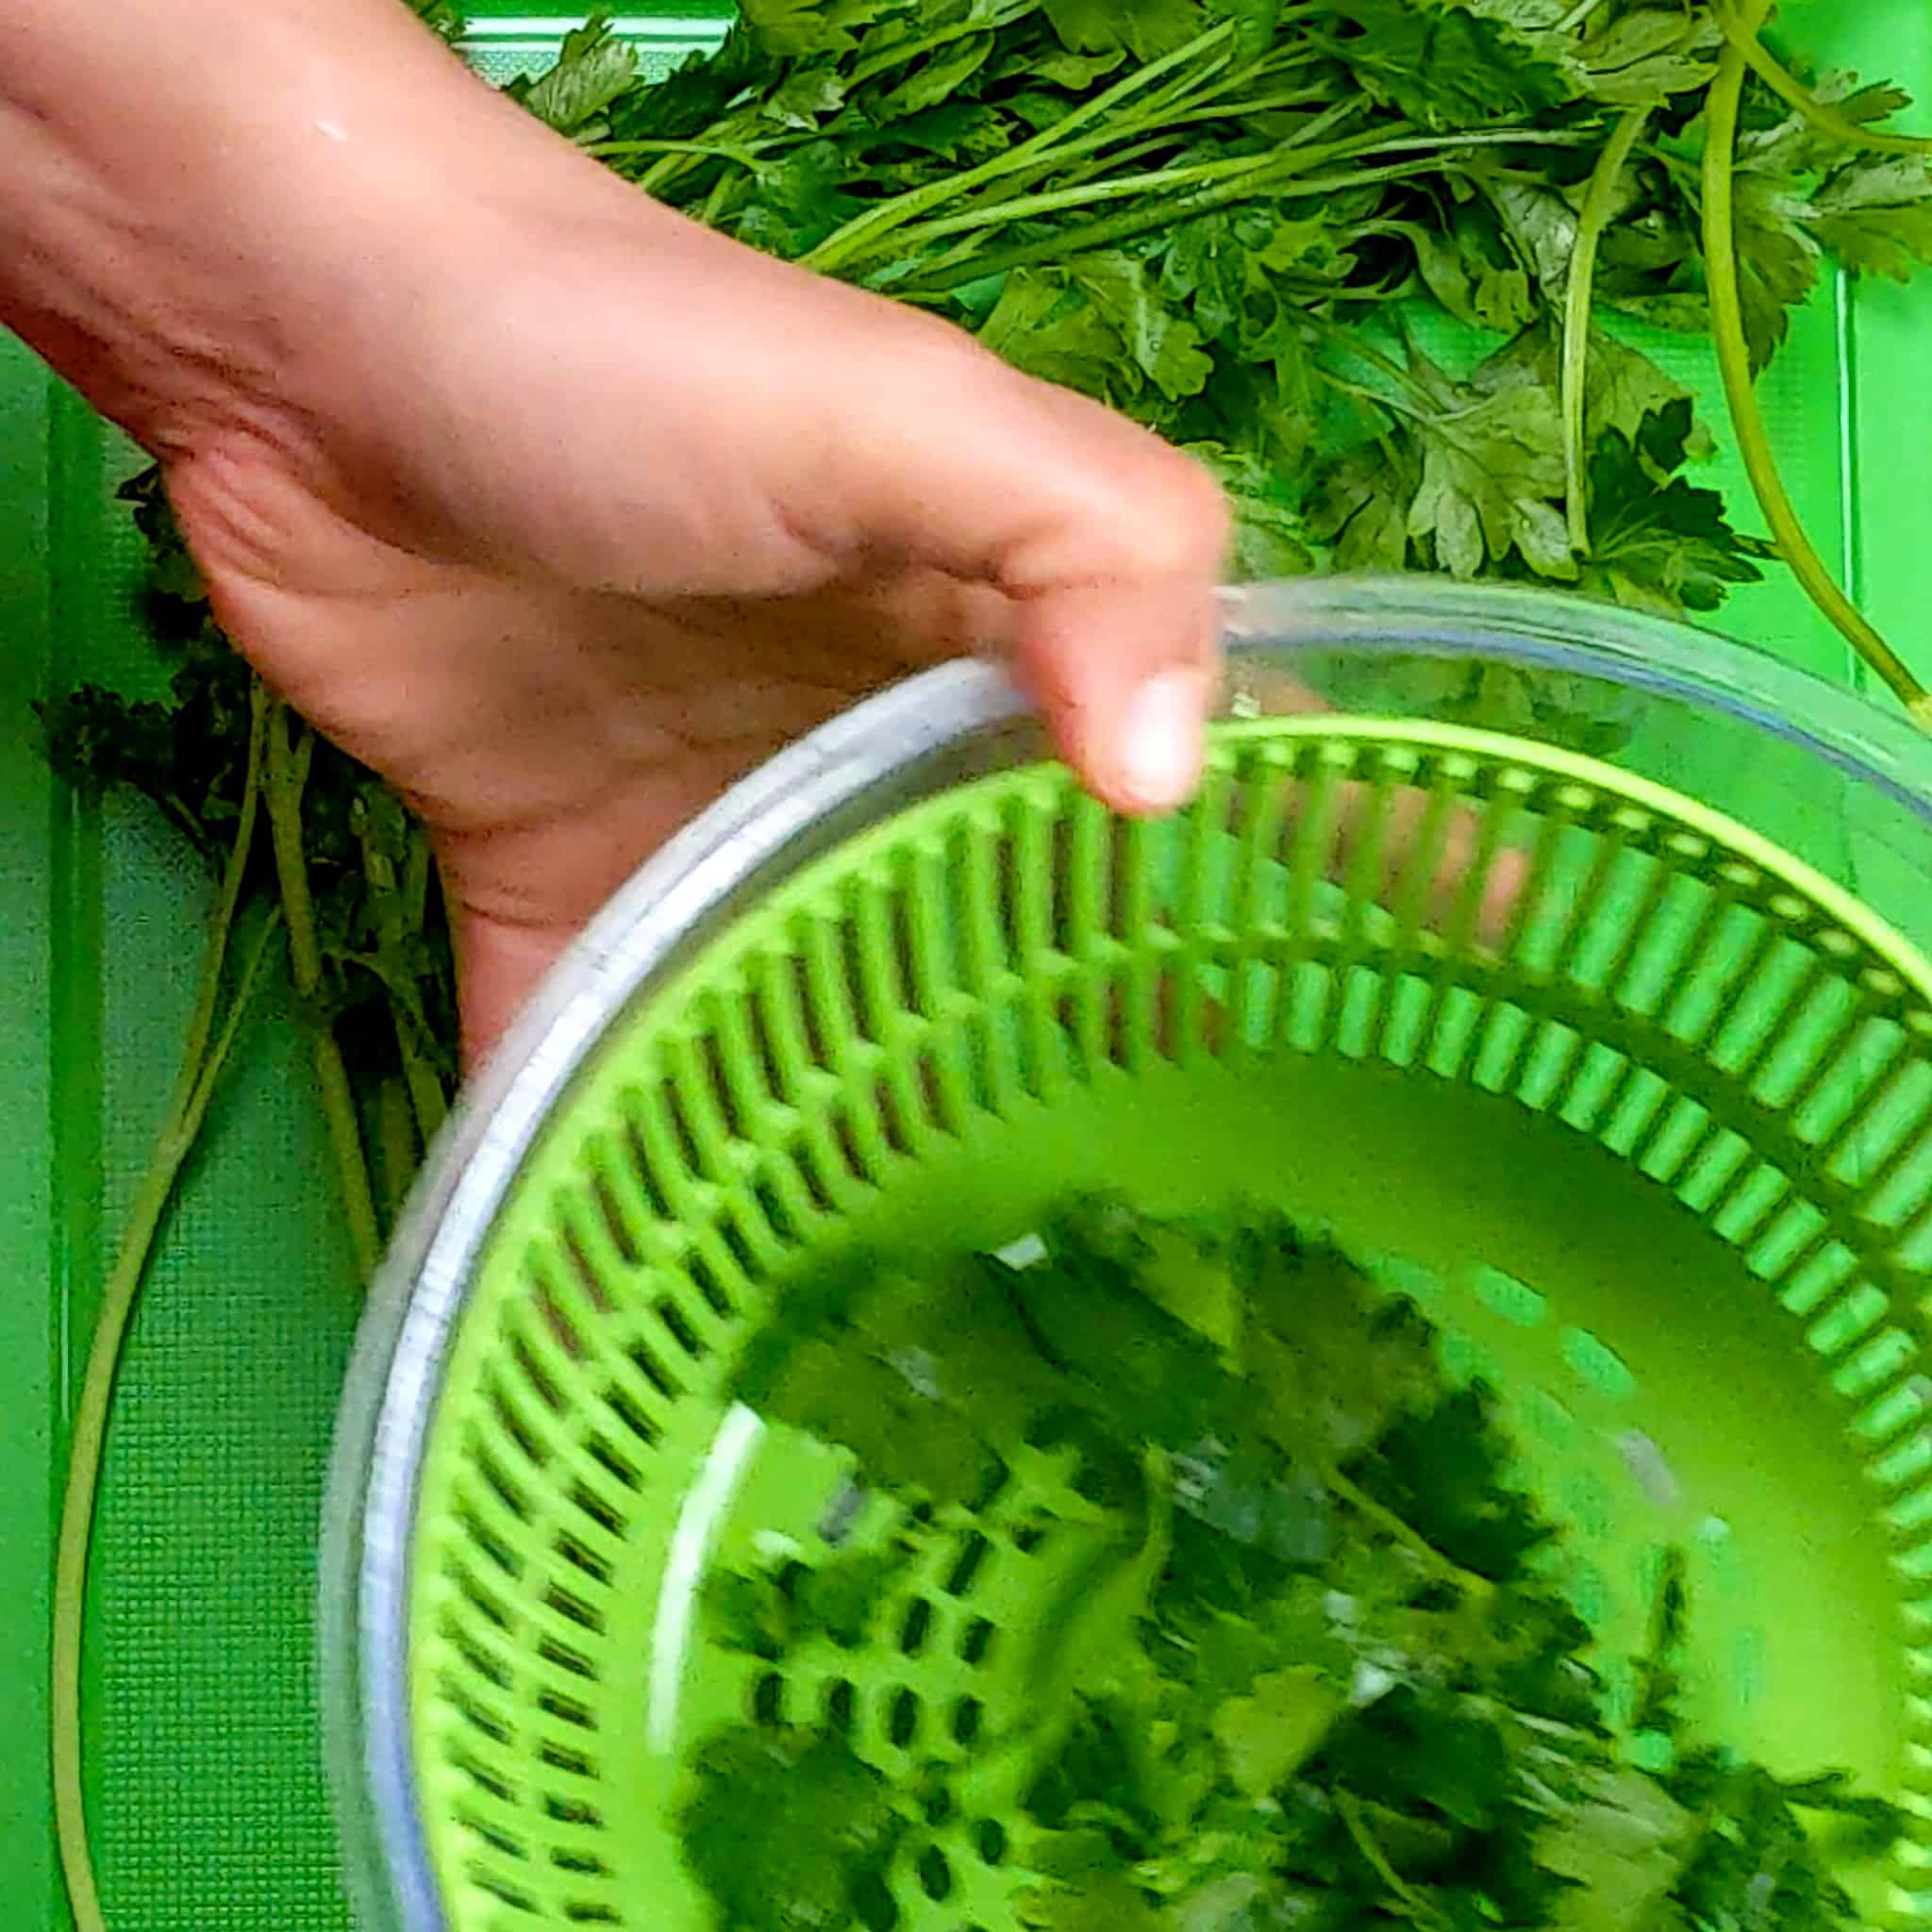 a hand holding a salad spinner base and basket filled with parsley leaves over a cutting board with a bunch of fresh parsley